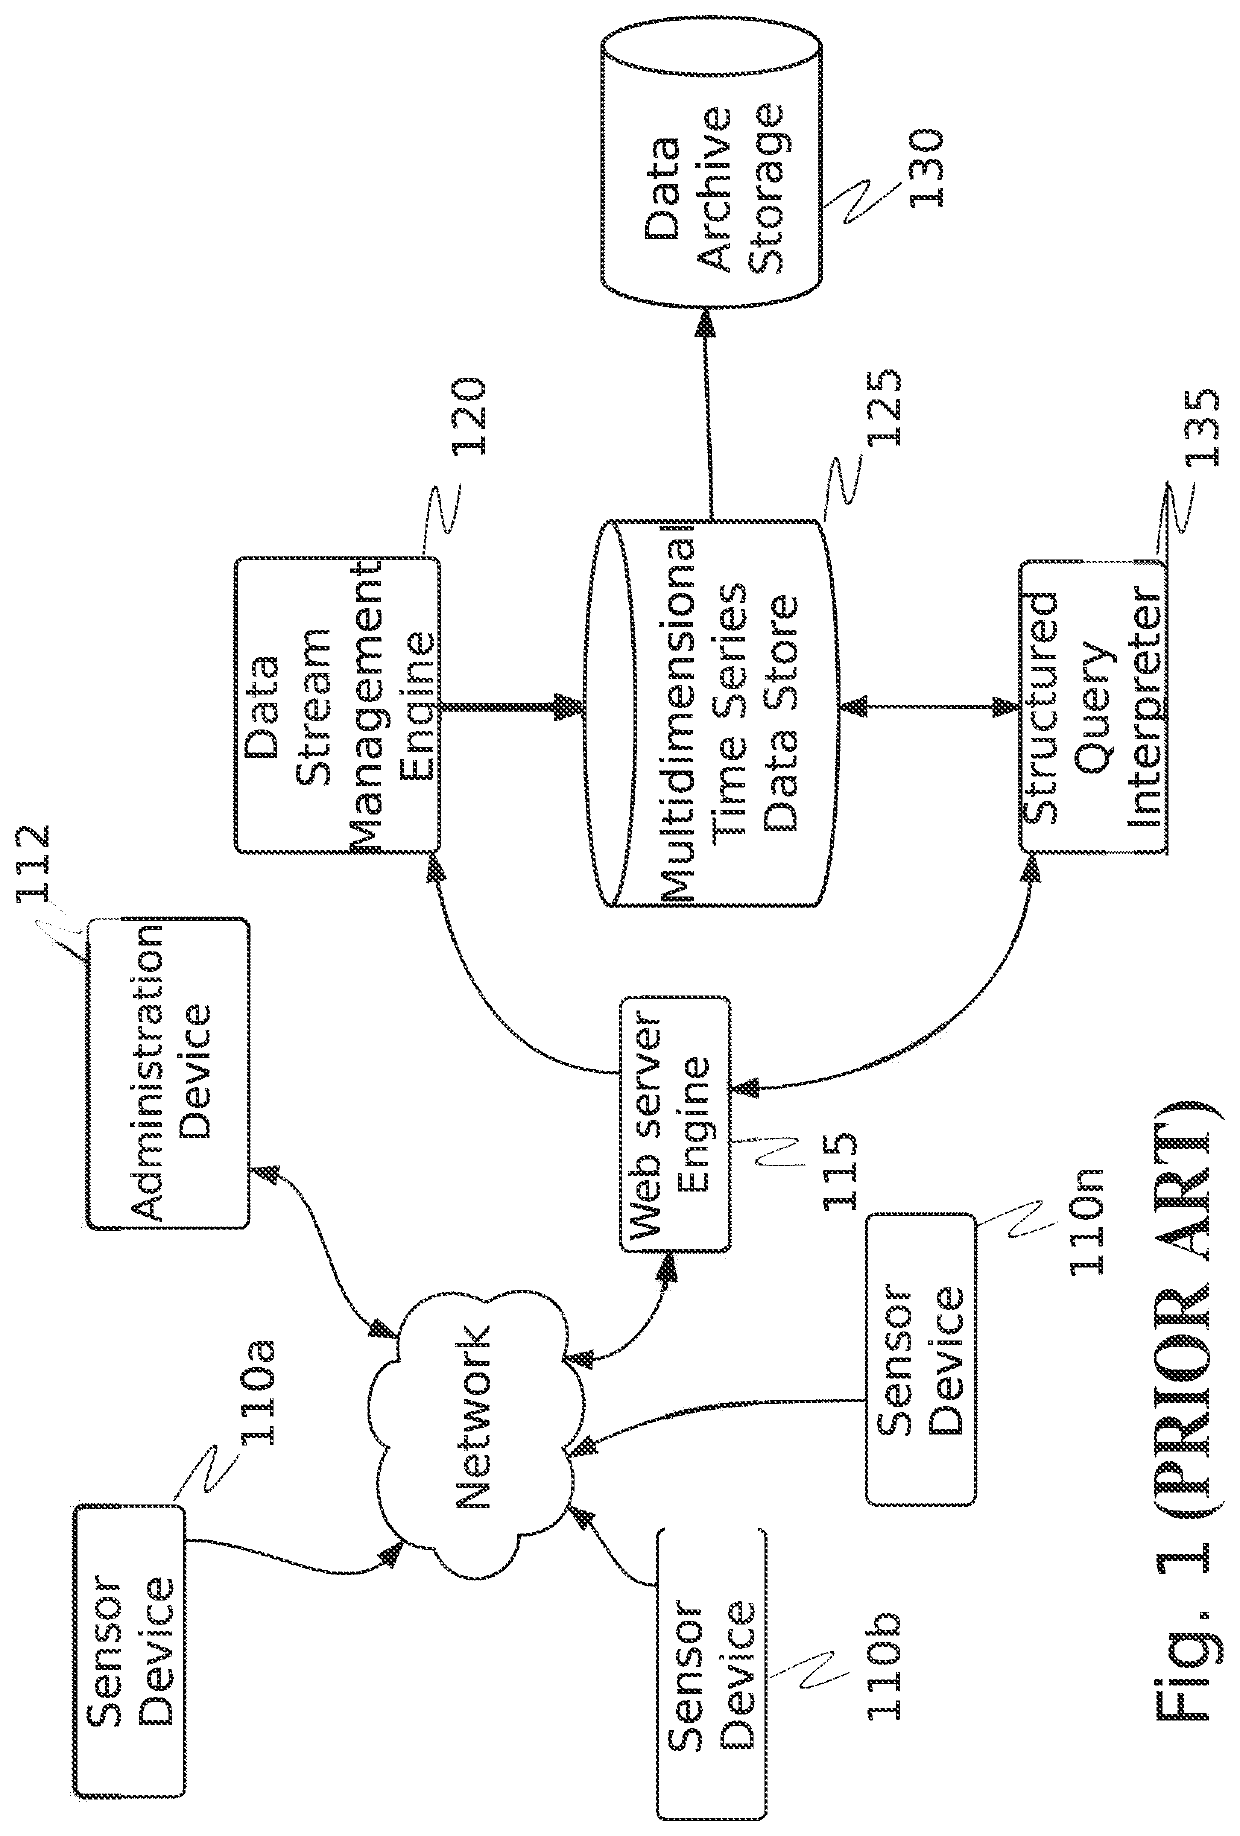 System and methods for automatically assessing and improving a cybersecurity risk score